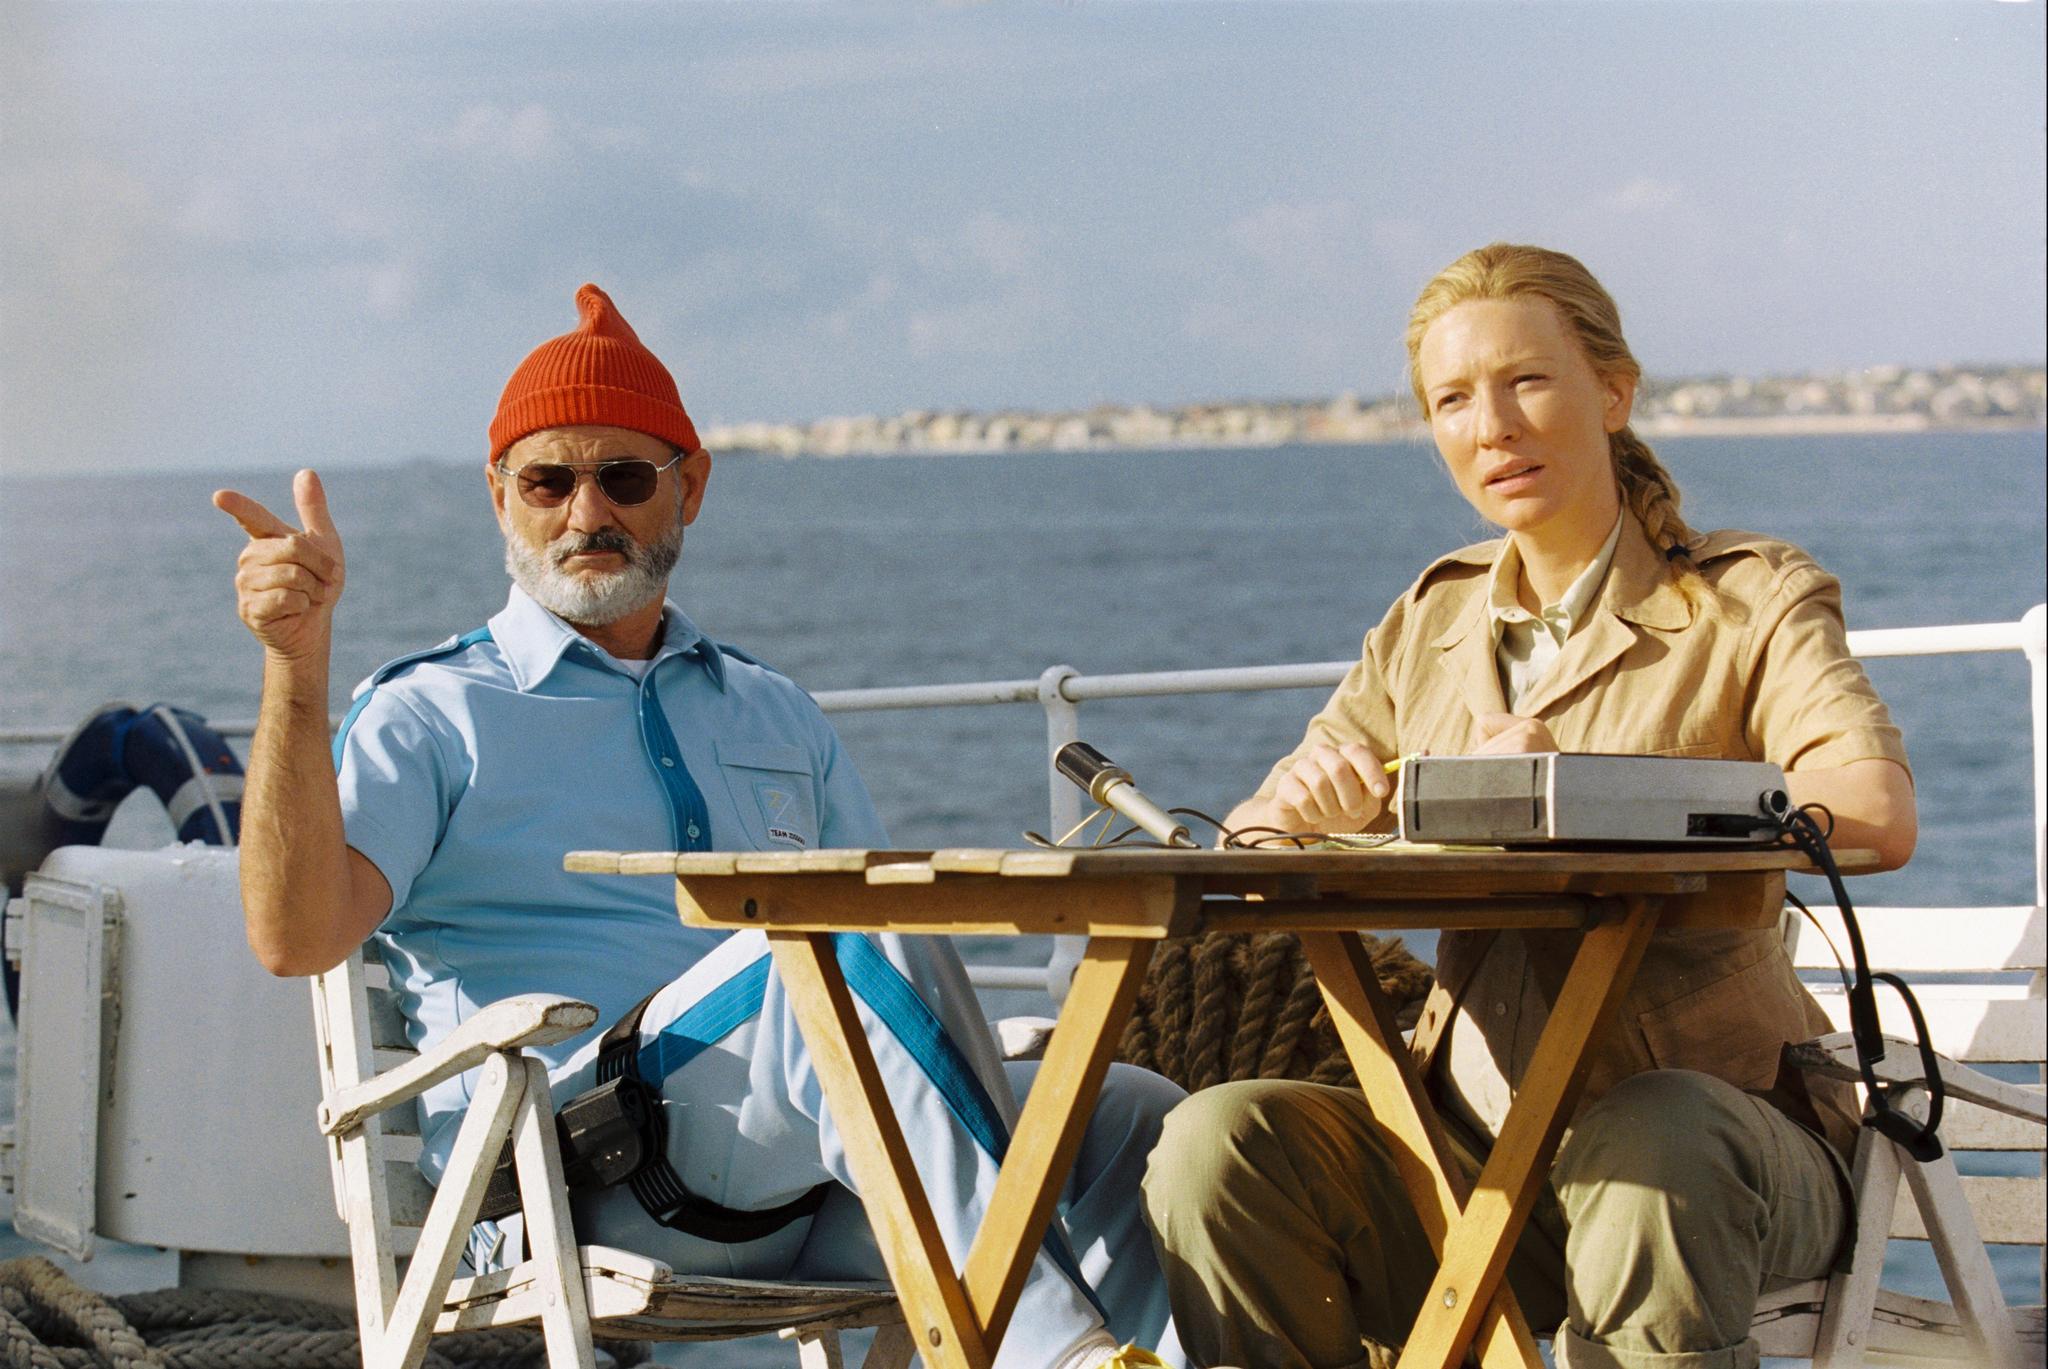 download life aquatic wallpaper which is under the life wallpapers